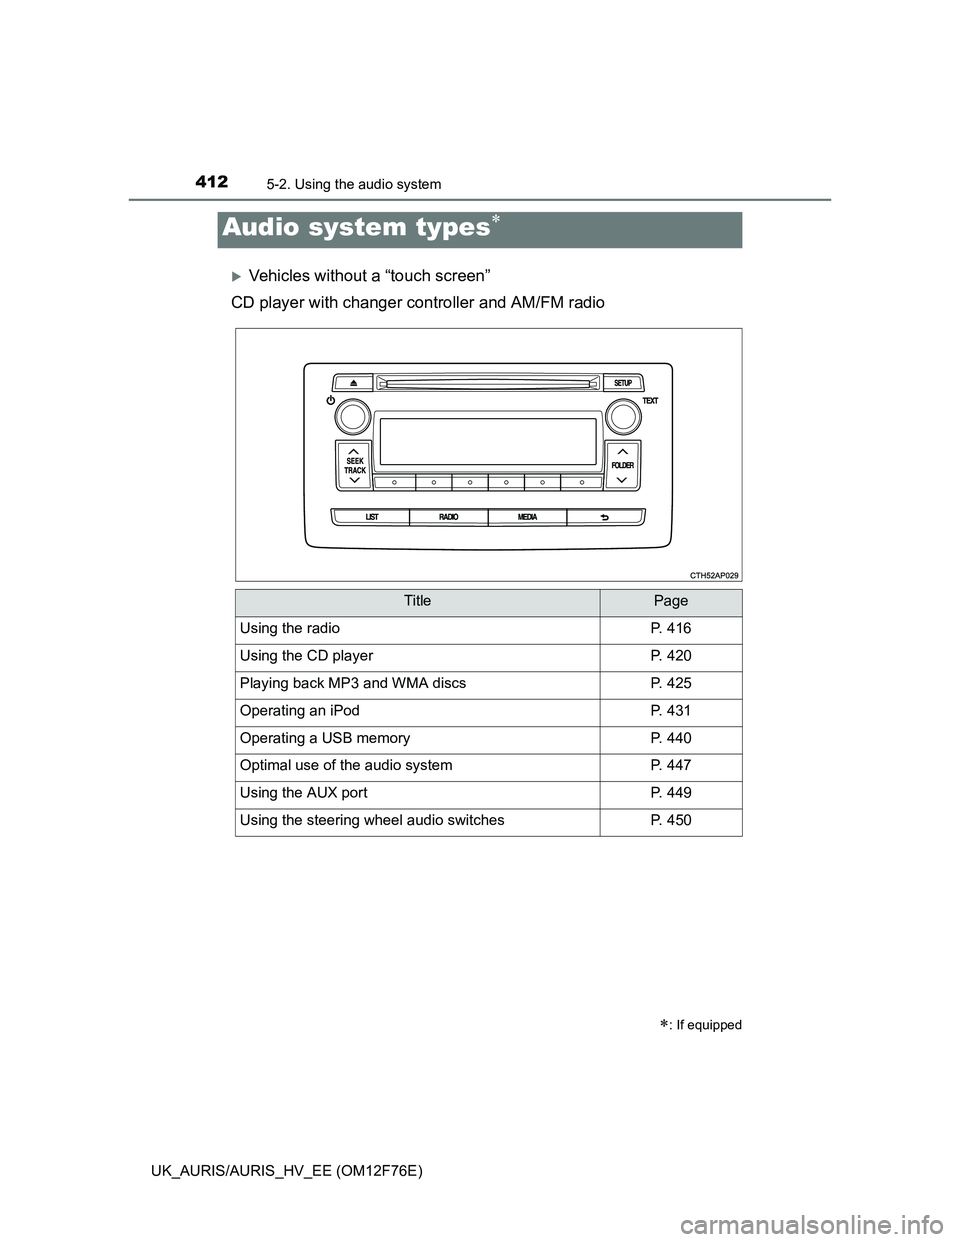 TOYOTA AURIS 2013  Owners Manual (in English) 412
UK_AURIS/AURIS_HV_EE (OM12F76E)
5-2. Using the audio system
Vehicles without a “touch screen”
CD player with changer controller and AM/FM radio
Audio system types
: If equipped
TitleP